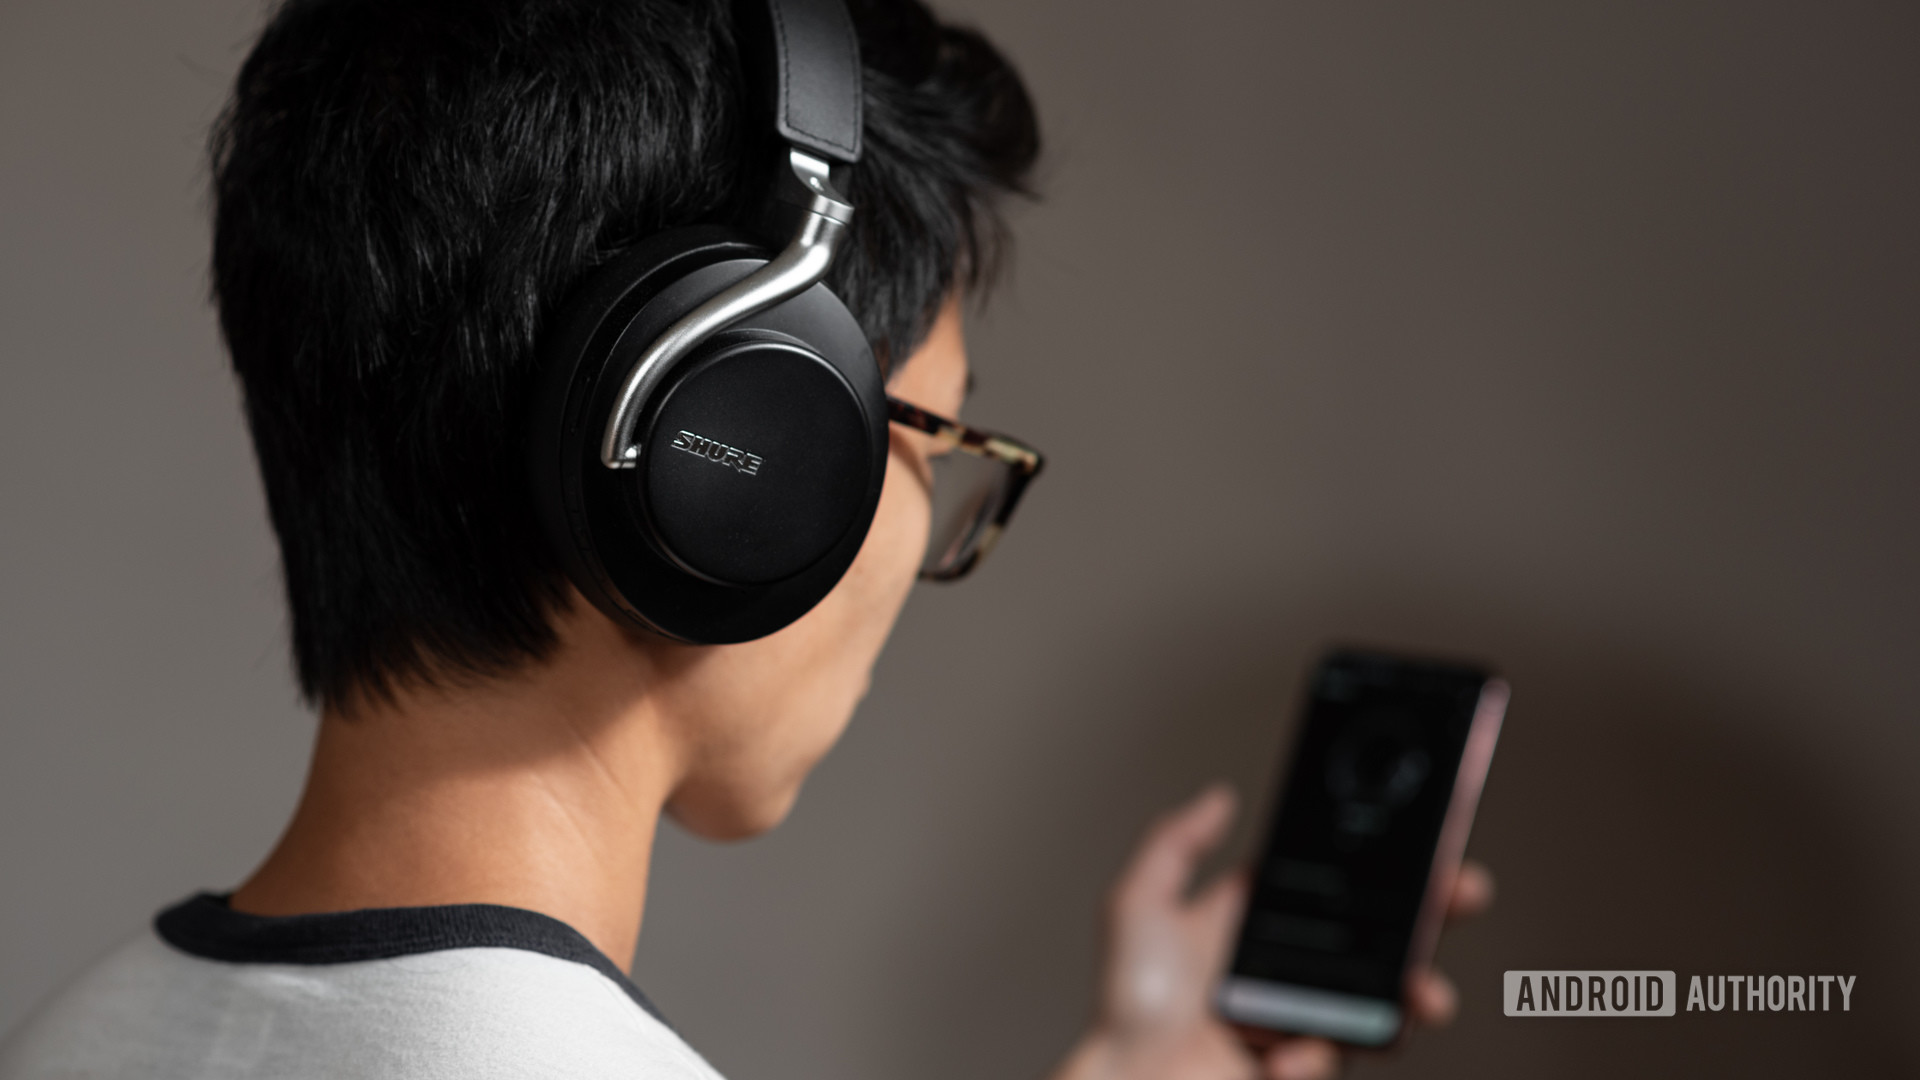 The Shure Aonic 50 noise cancelling headphones worn by a woman using the Shure mobile app.